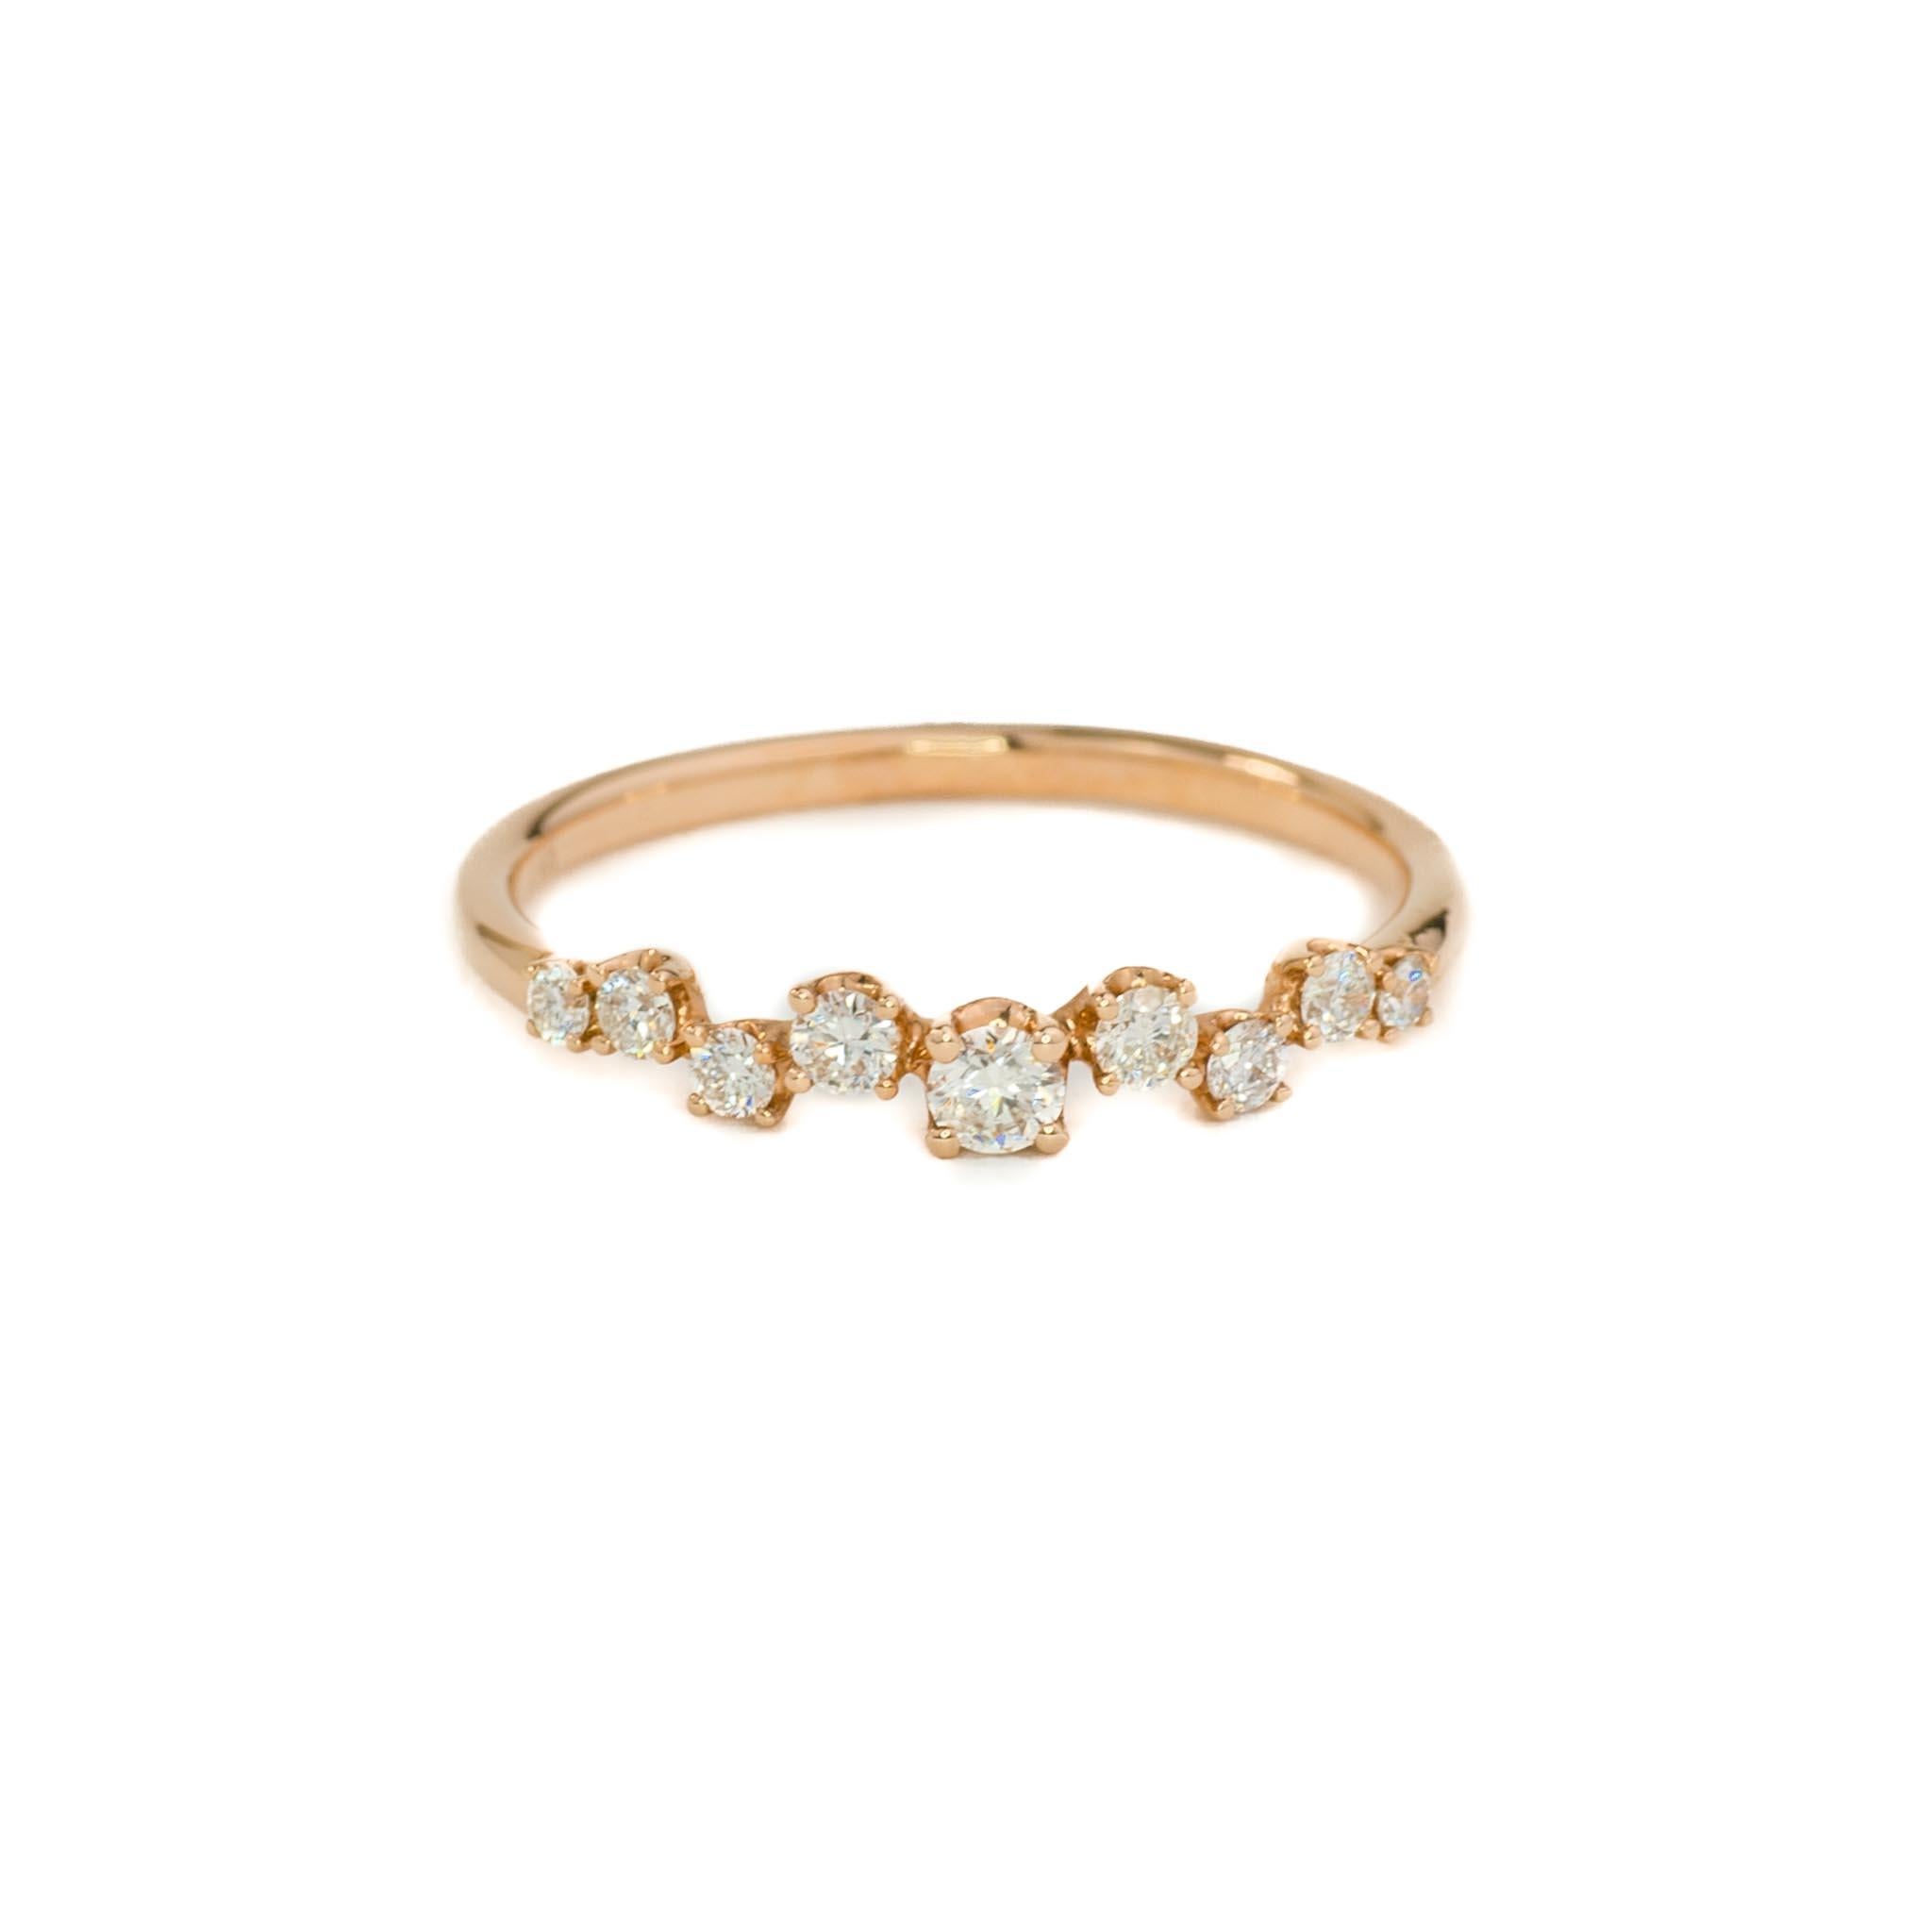 Our diamond cluster ring is made with only the finest ethical diamonds, set to sparkle and shine. The classic design is perfect for adding a touch of glamour to any everyday outfit. Perfect for stacking if desired, this rose gold diamond band is the